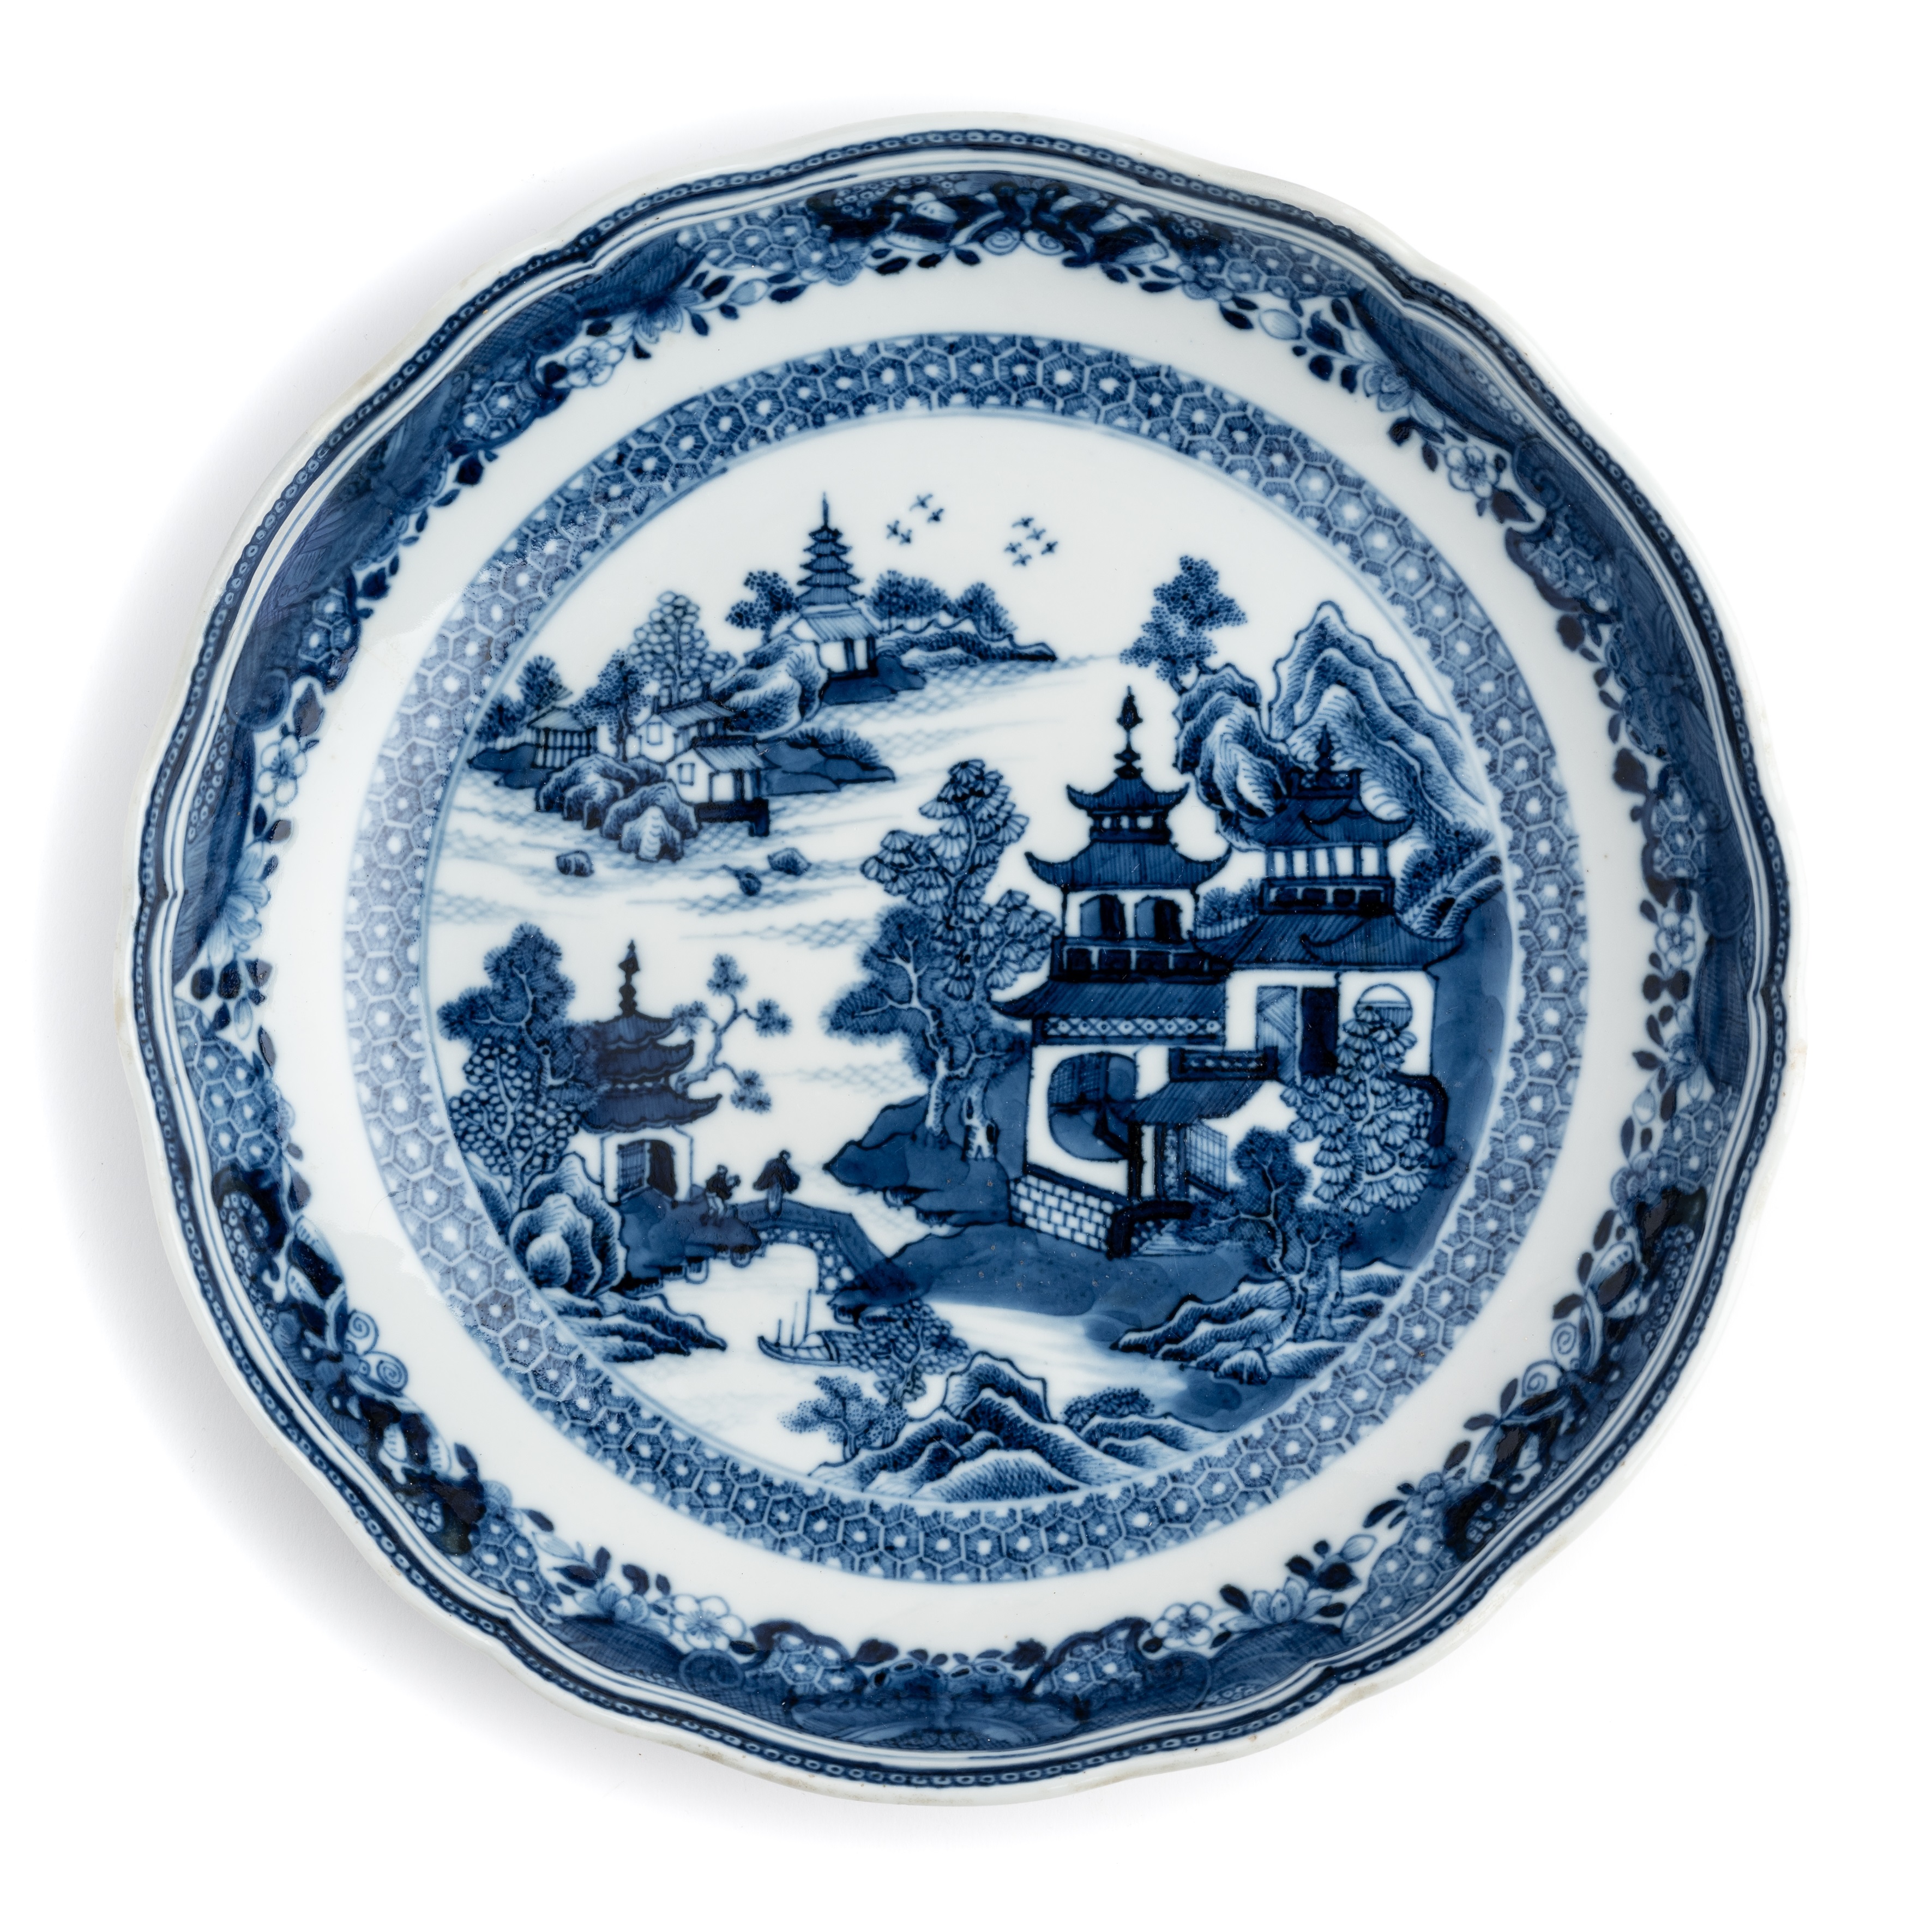 A CHINESE BLUE AND WHITE DISH, QING DYNASTY, CIRCA 1800